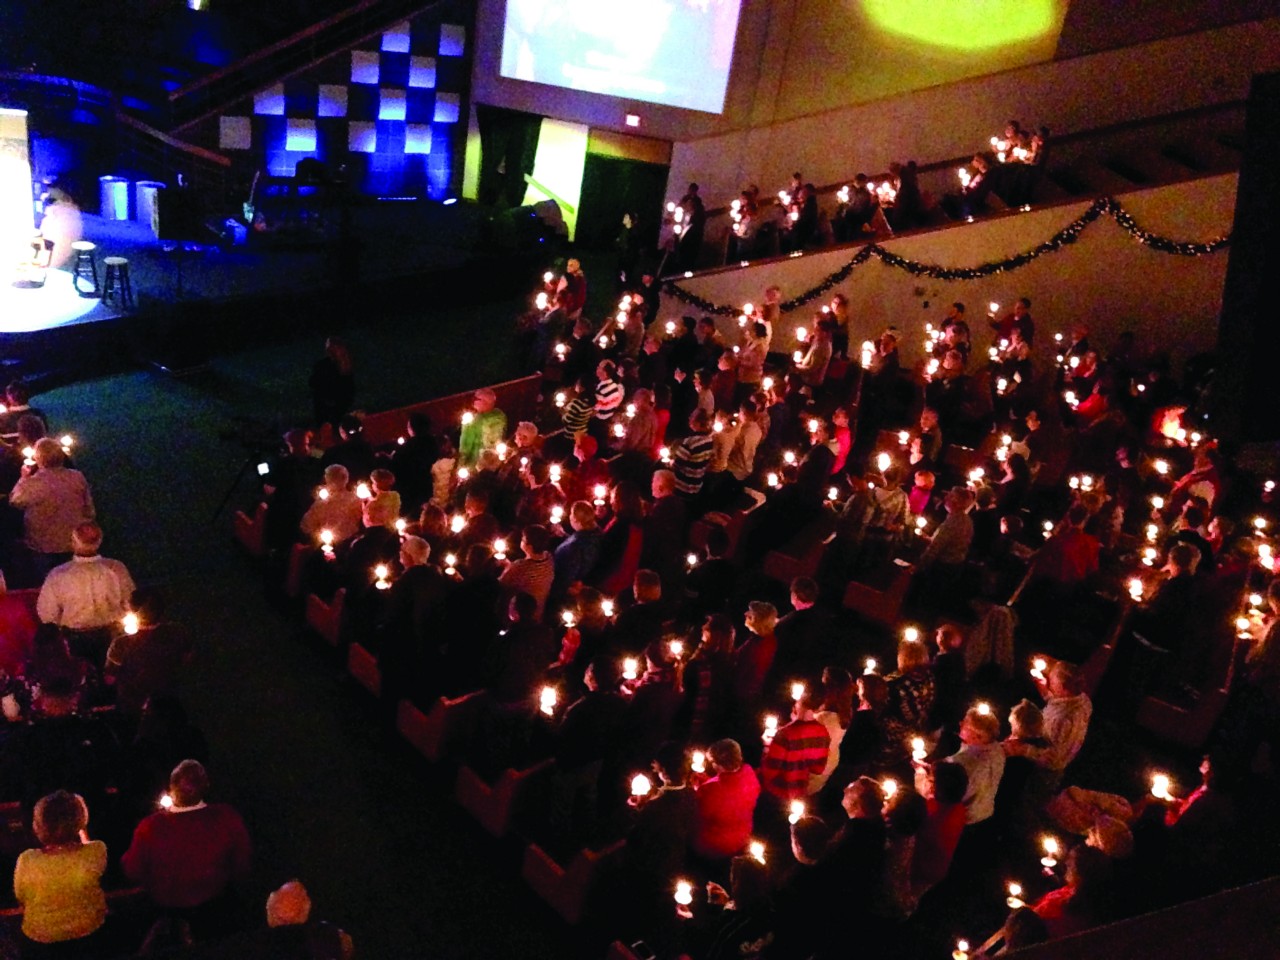 Bethany, Council Road will have two candlelight services on Christmas Eve, at 6 and 11 p.m.